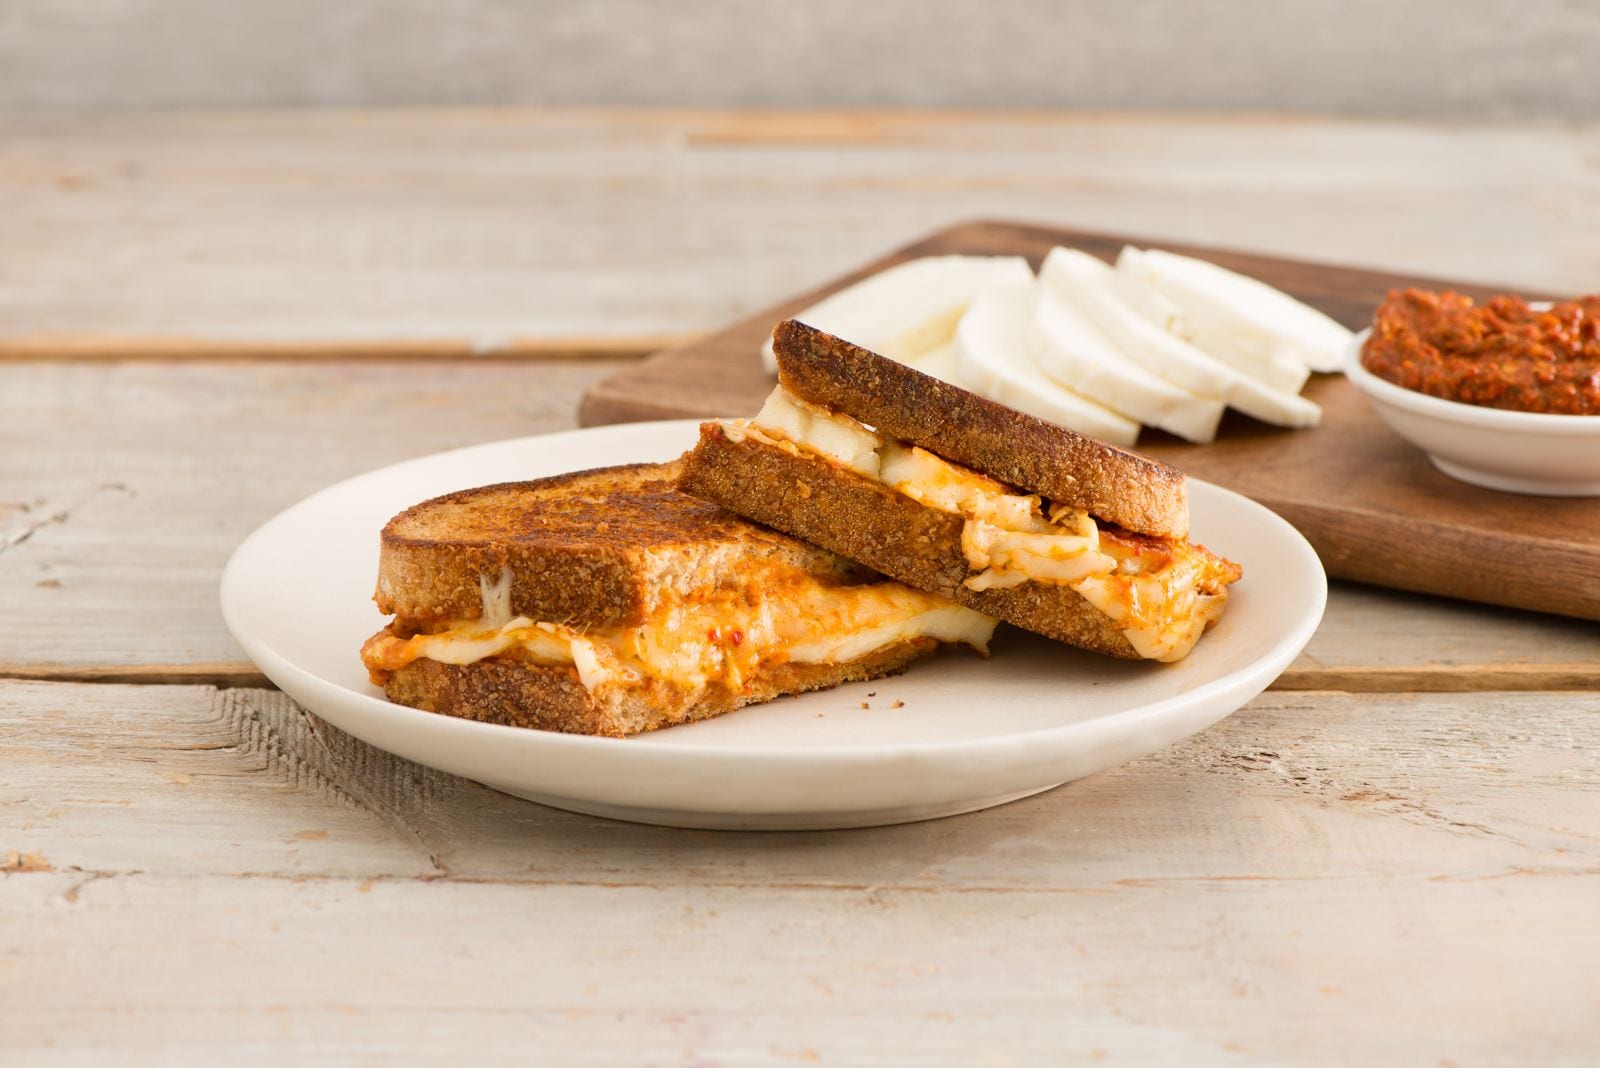 https://supherbfarms.com/wp-content/uploads/2020/07/moroccan-harissa-and-halloumi-grilled-cheese_compressed.jpg